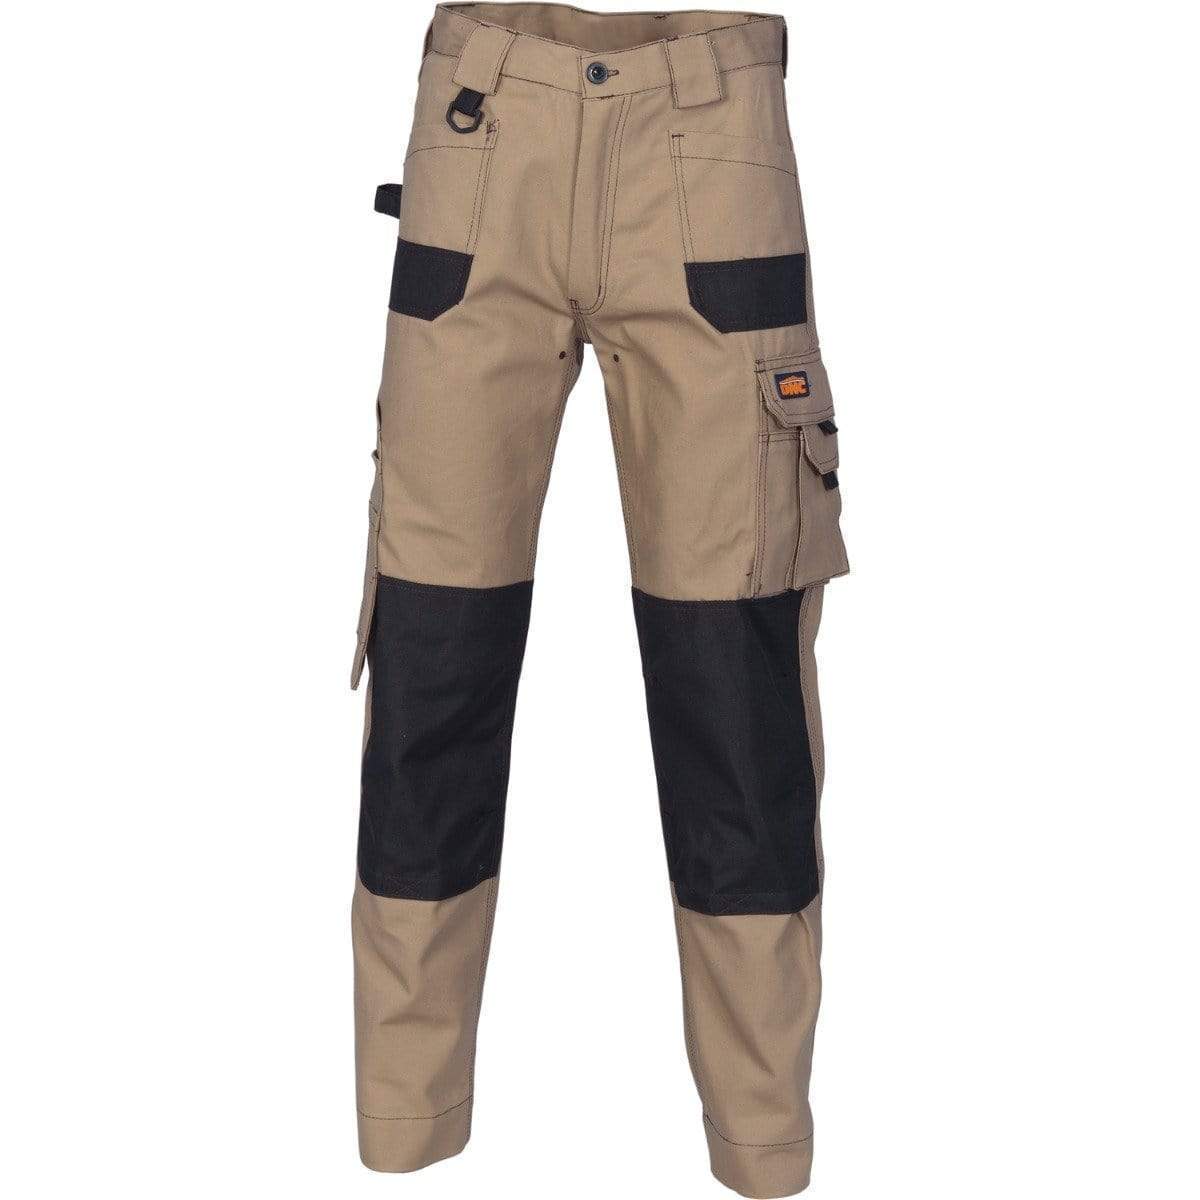 DNC Workwear Work Wear Desert Sand / 87R DNC WORKWEAR Duratex Cotton Duck Weave Cargo Pants - Knee Pads Not Included 3335